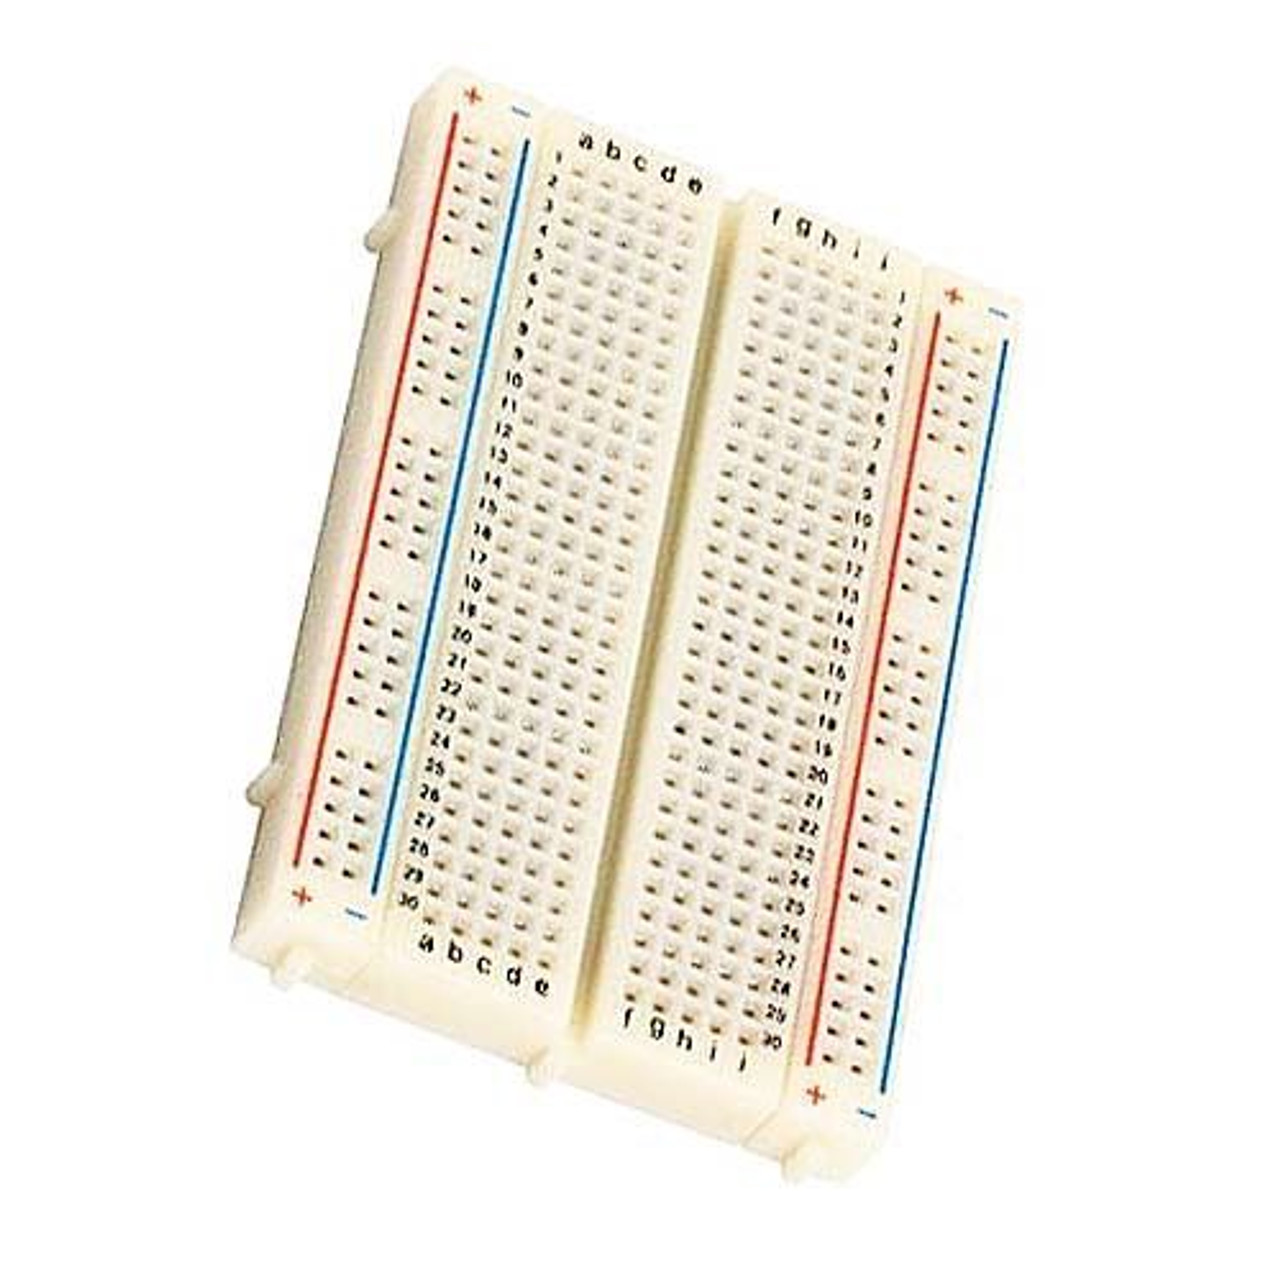 Steren 509-005 Solderless Breadboard TP 400 Tie Point Protoboard 19-29 AWG Electronic Projects Test Reusable Prototyping ABS Polymer, Part # 509005